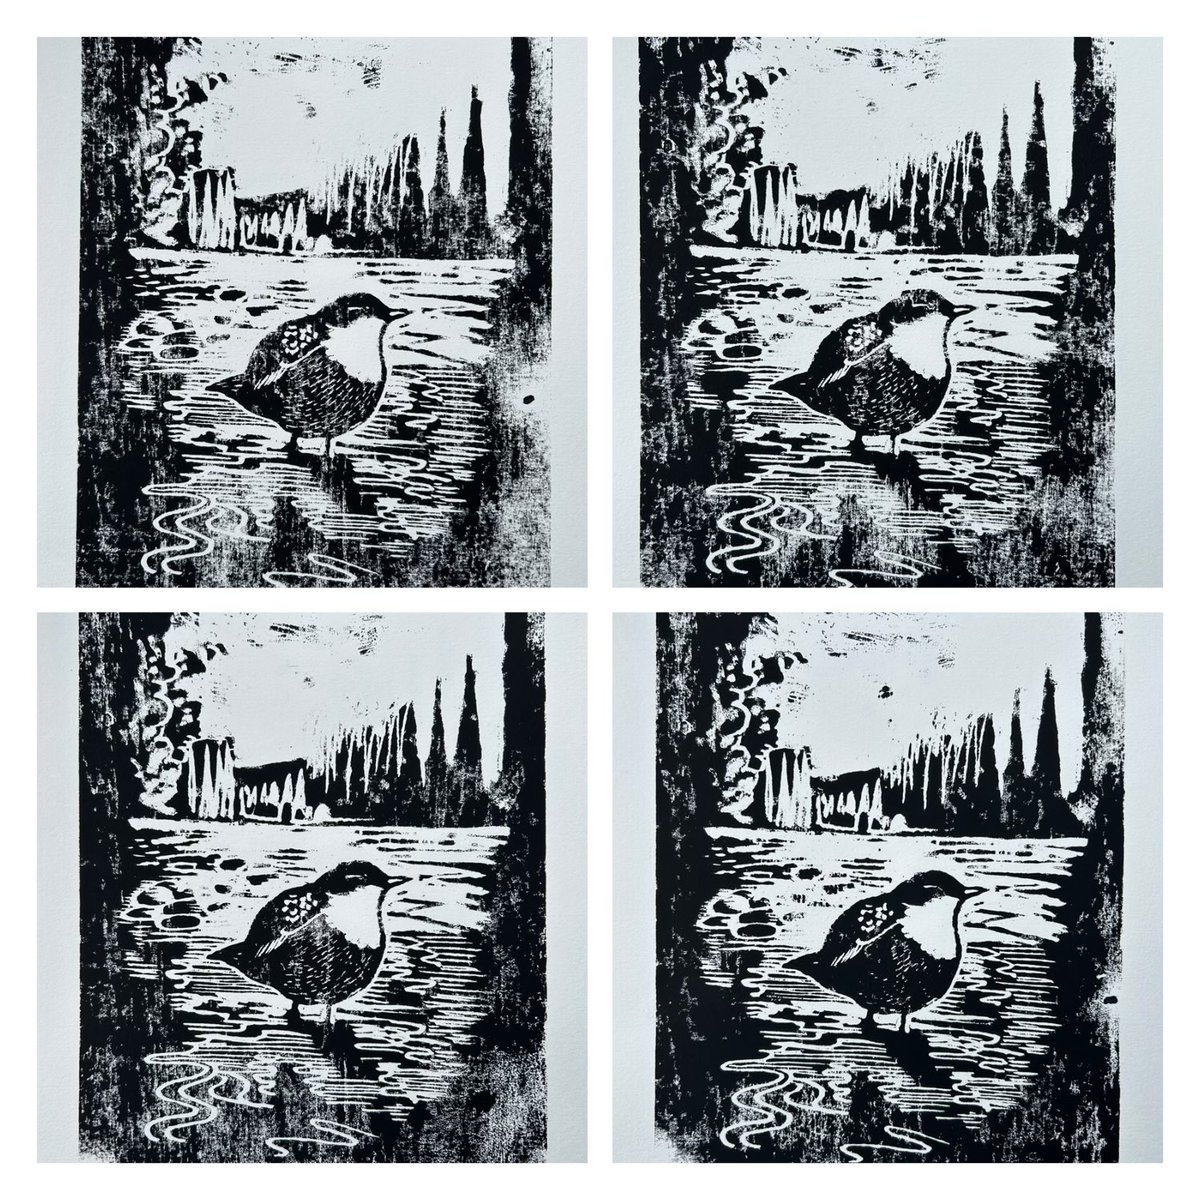 I’ve made 15 Dipper woodcut prints. Available now on the website: jimmoir.com